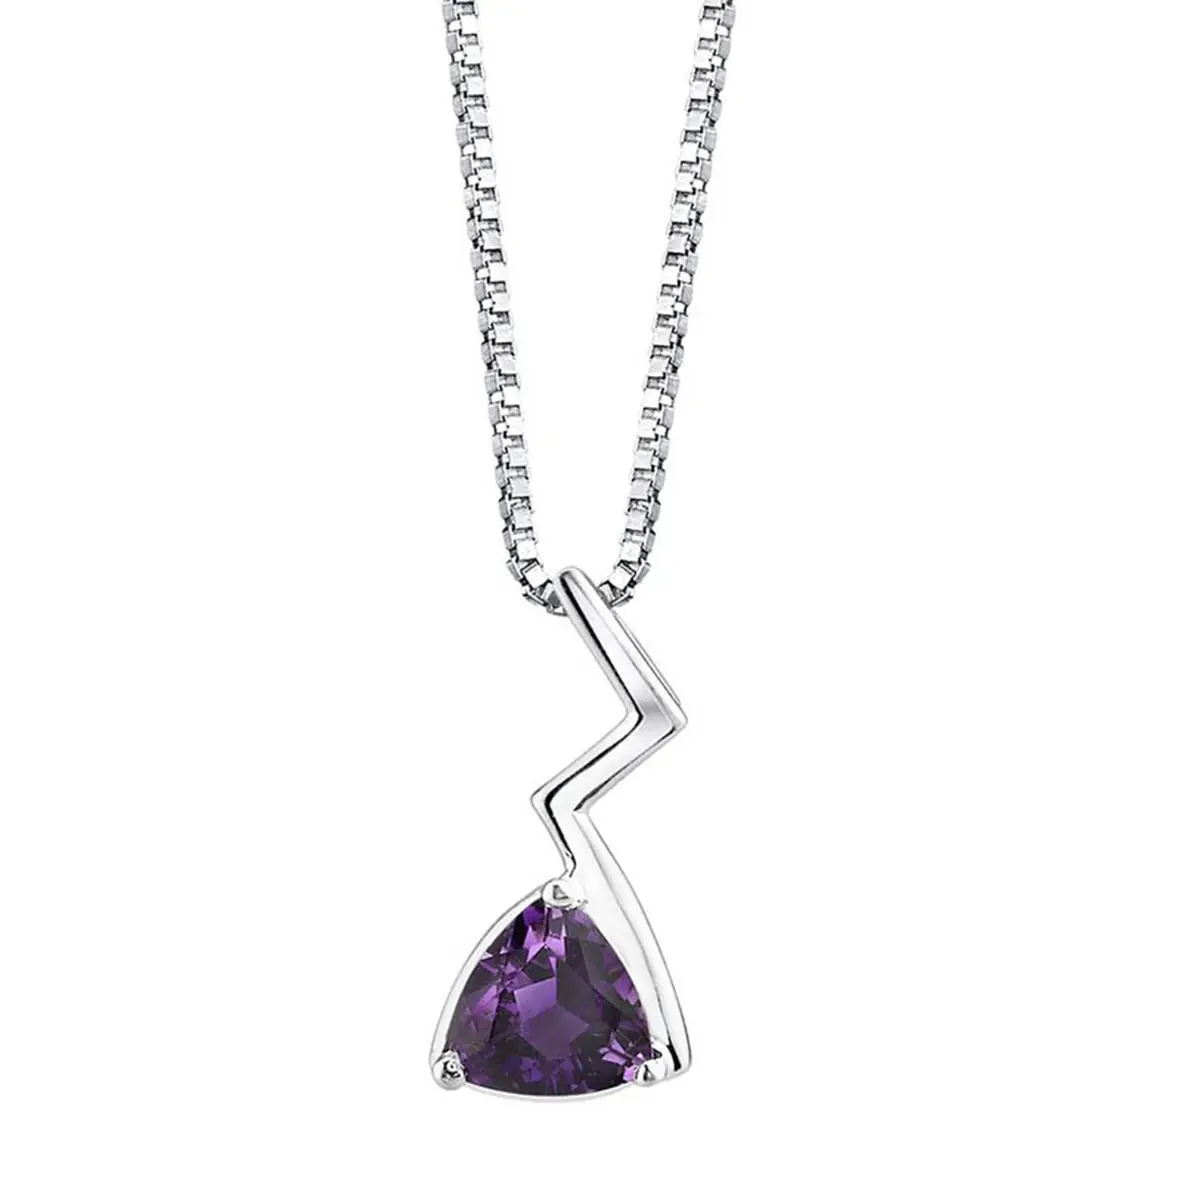 Delivery within 2-3 weeks Amethyst Pendant Small Amethyst Price Per Carat Best Place to Buy Necklaces